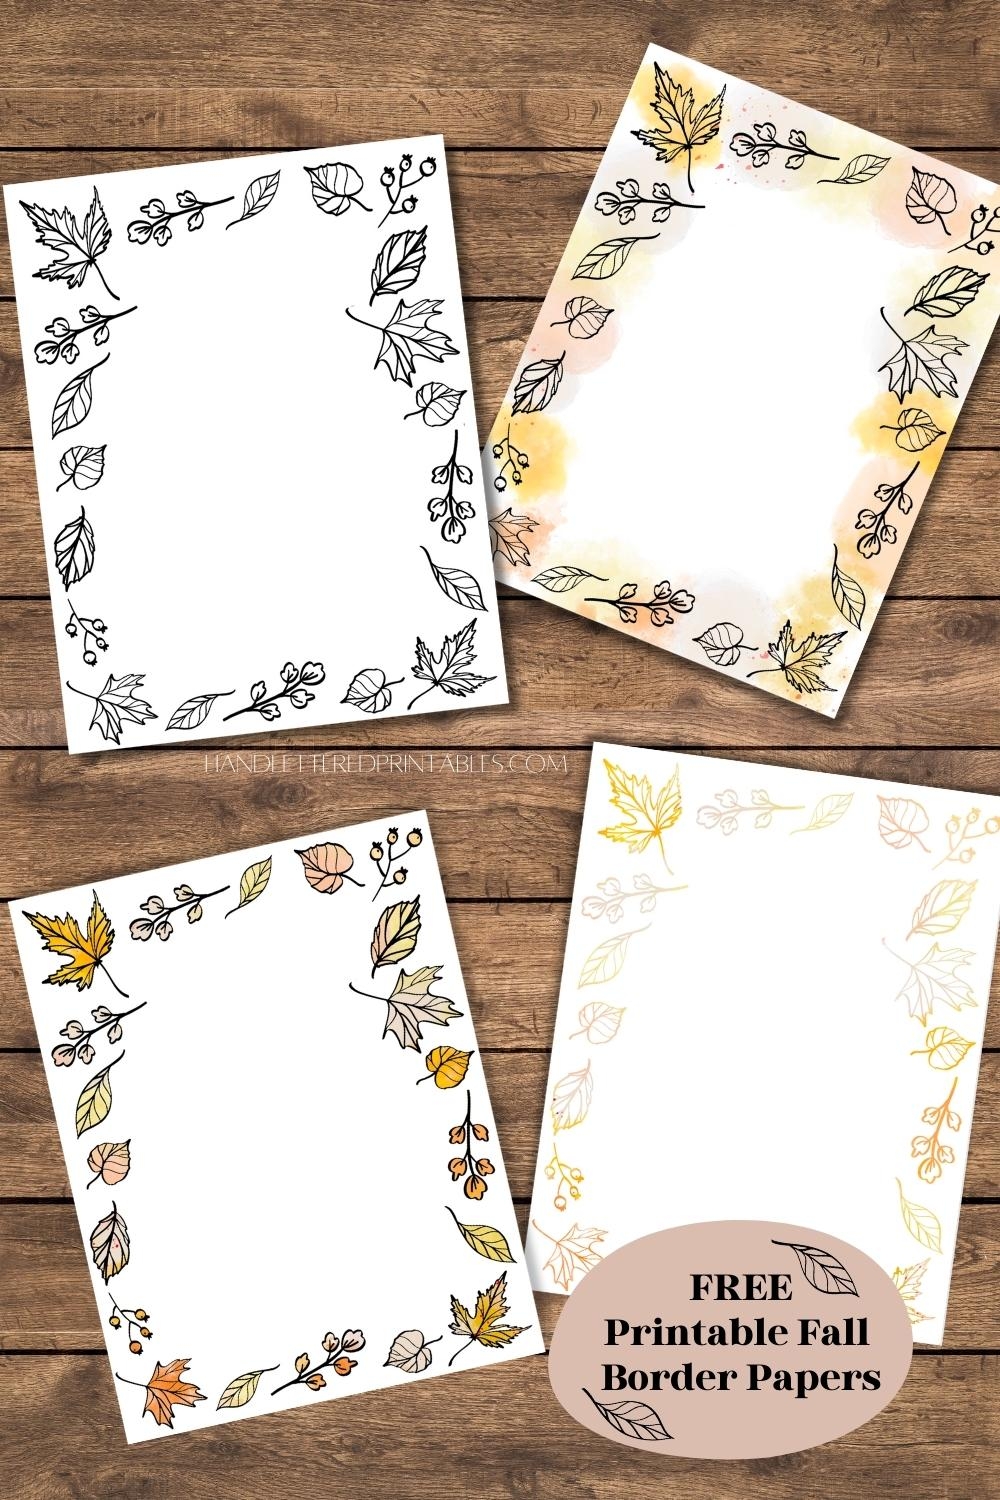 Fall Borders Free Printable Paper With Autumn Leaves Hand Lettered Printables - Free Printable Border Paper